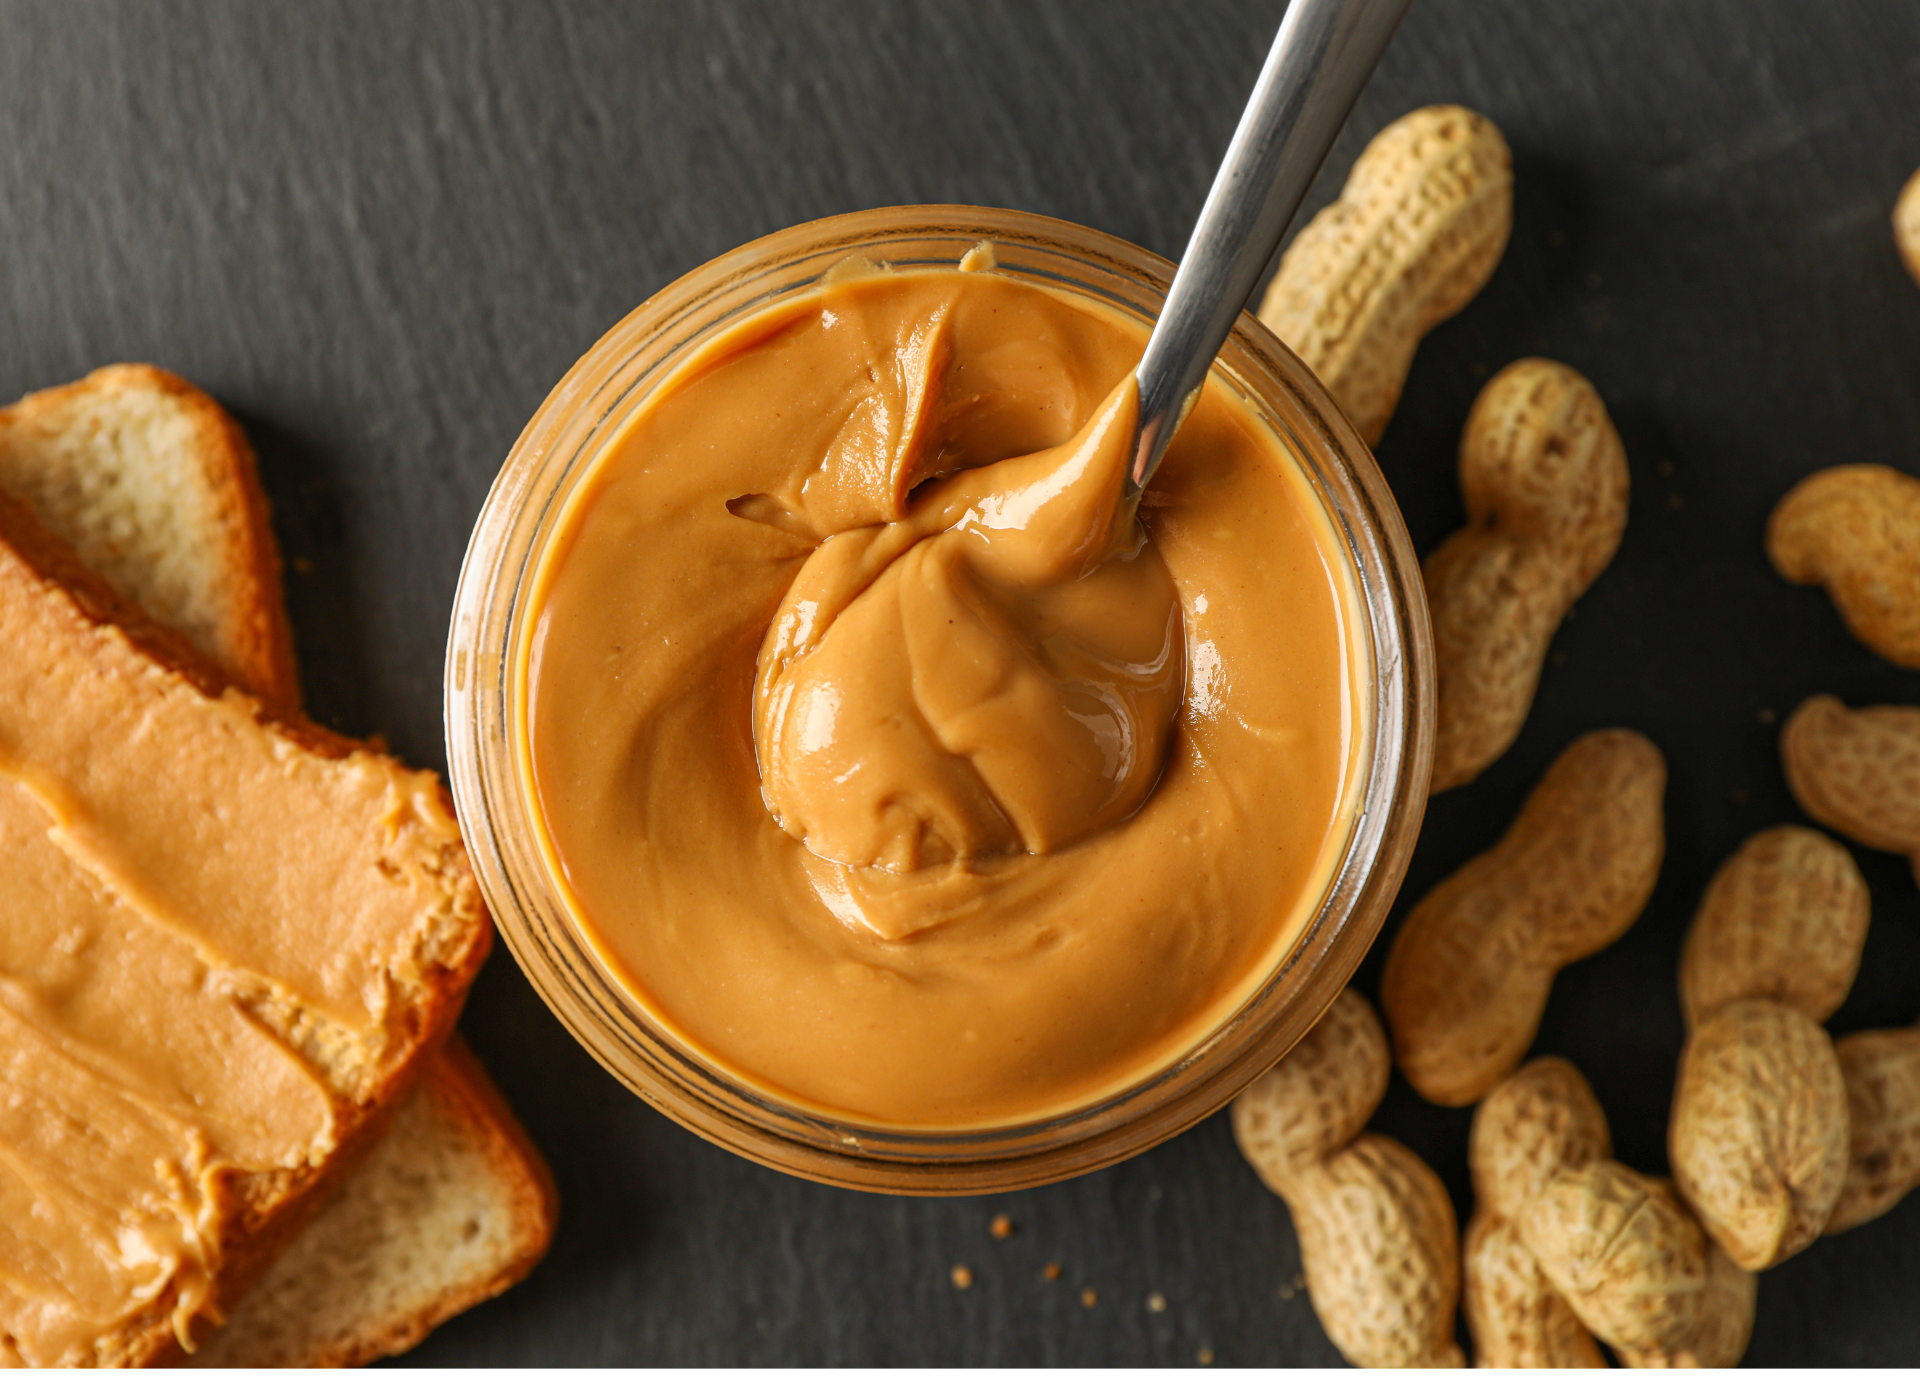 The Health Benefits of Grass-Fed, Pasture-Raised Collagen in Nut Butters